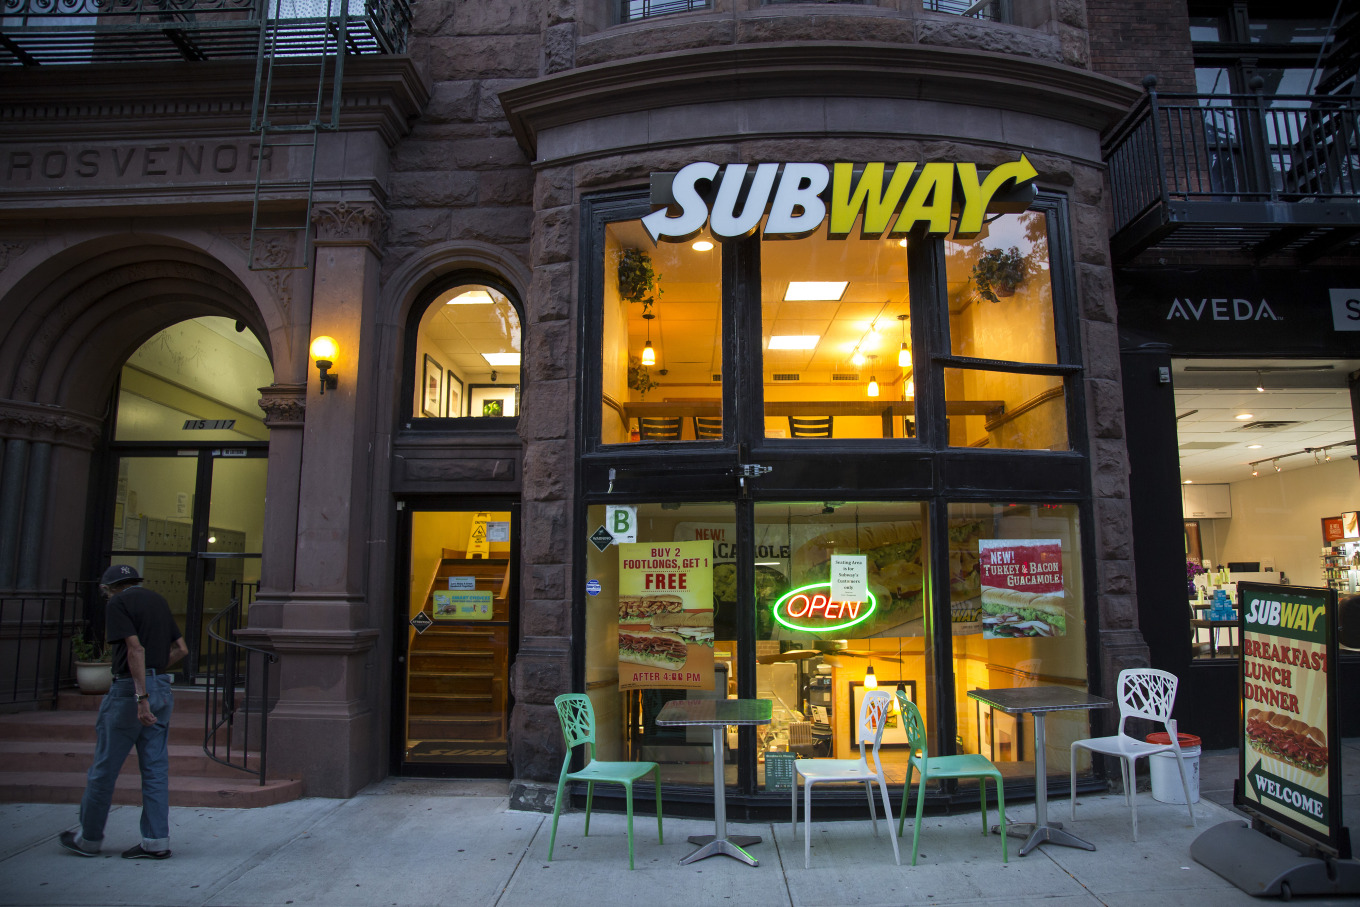 Exclusive: Subway comes up with debt plan to clinch $10 billion-plus sale